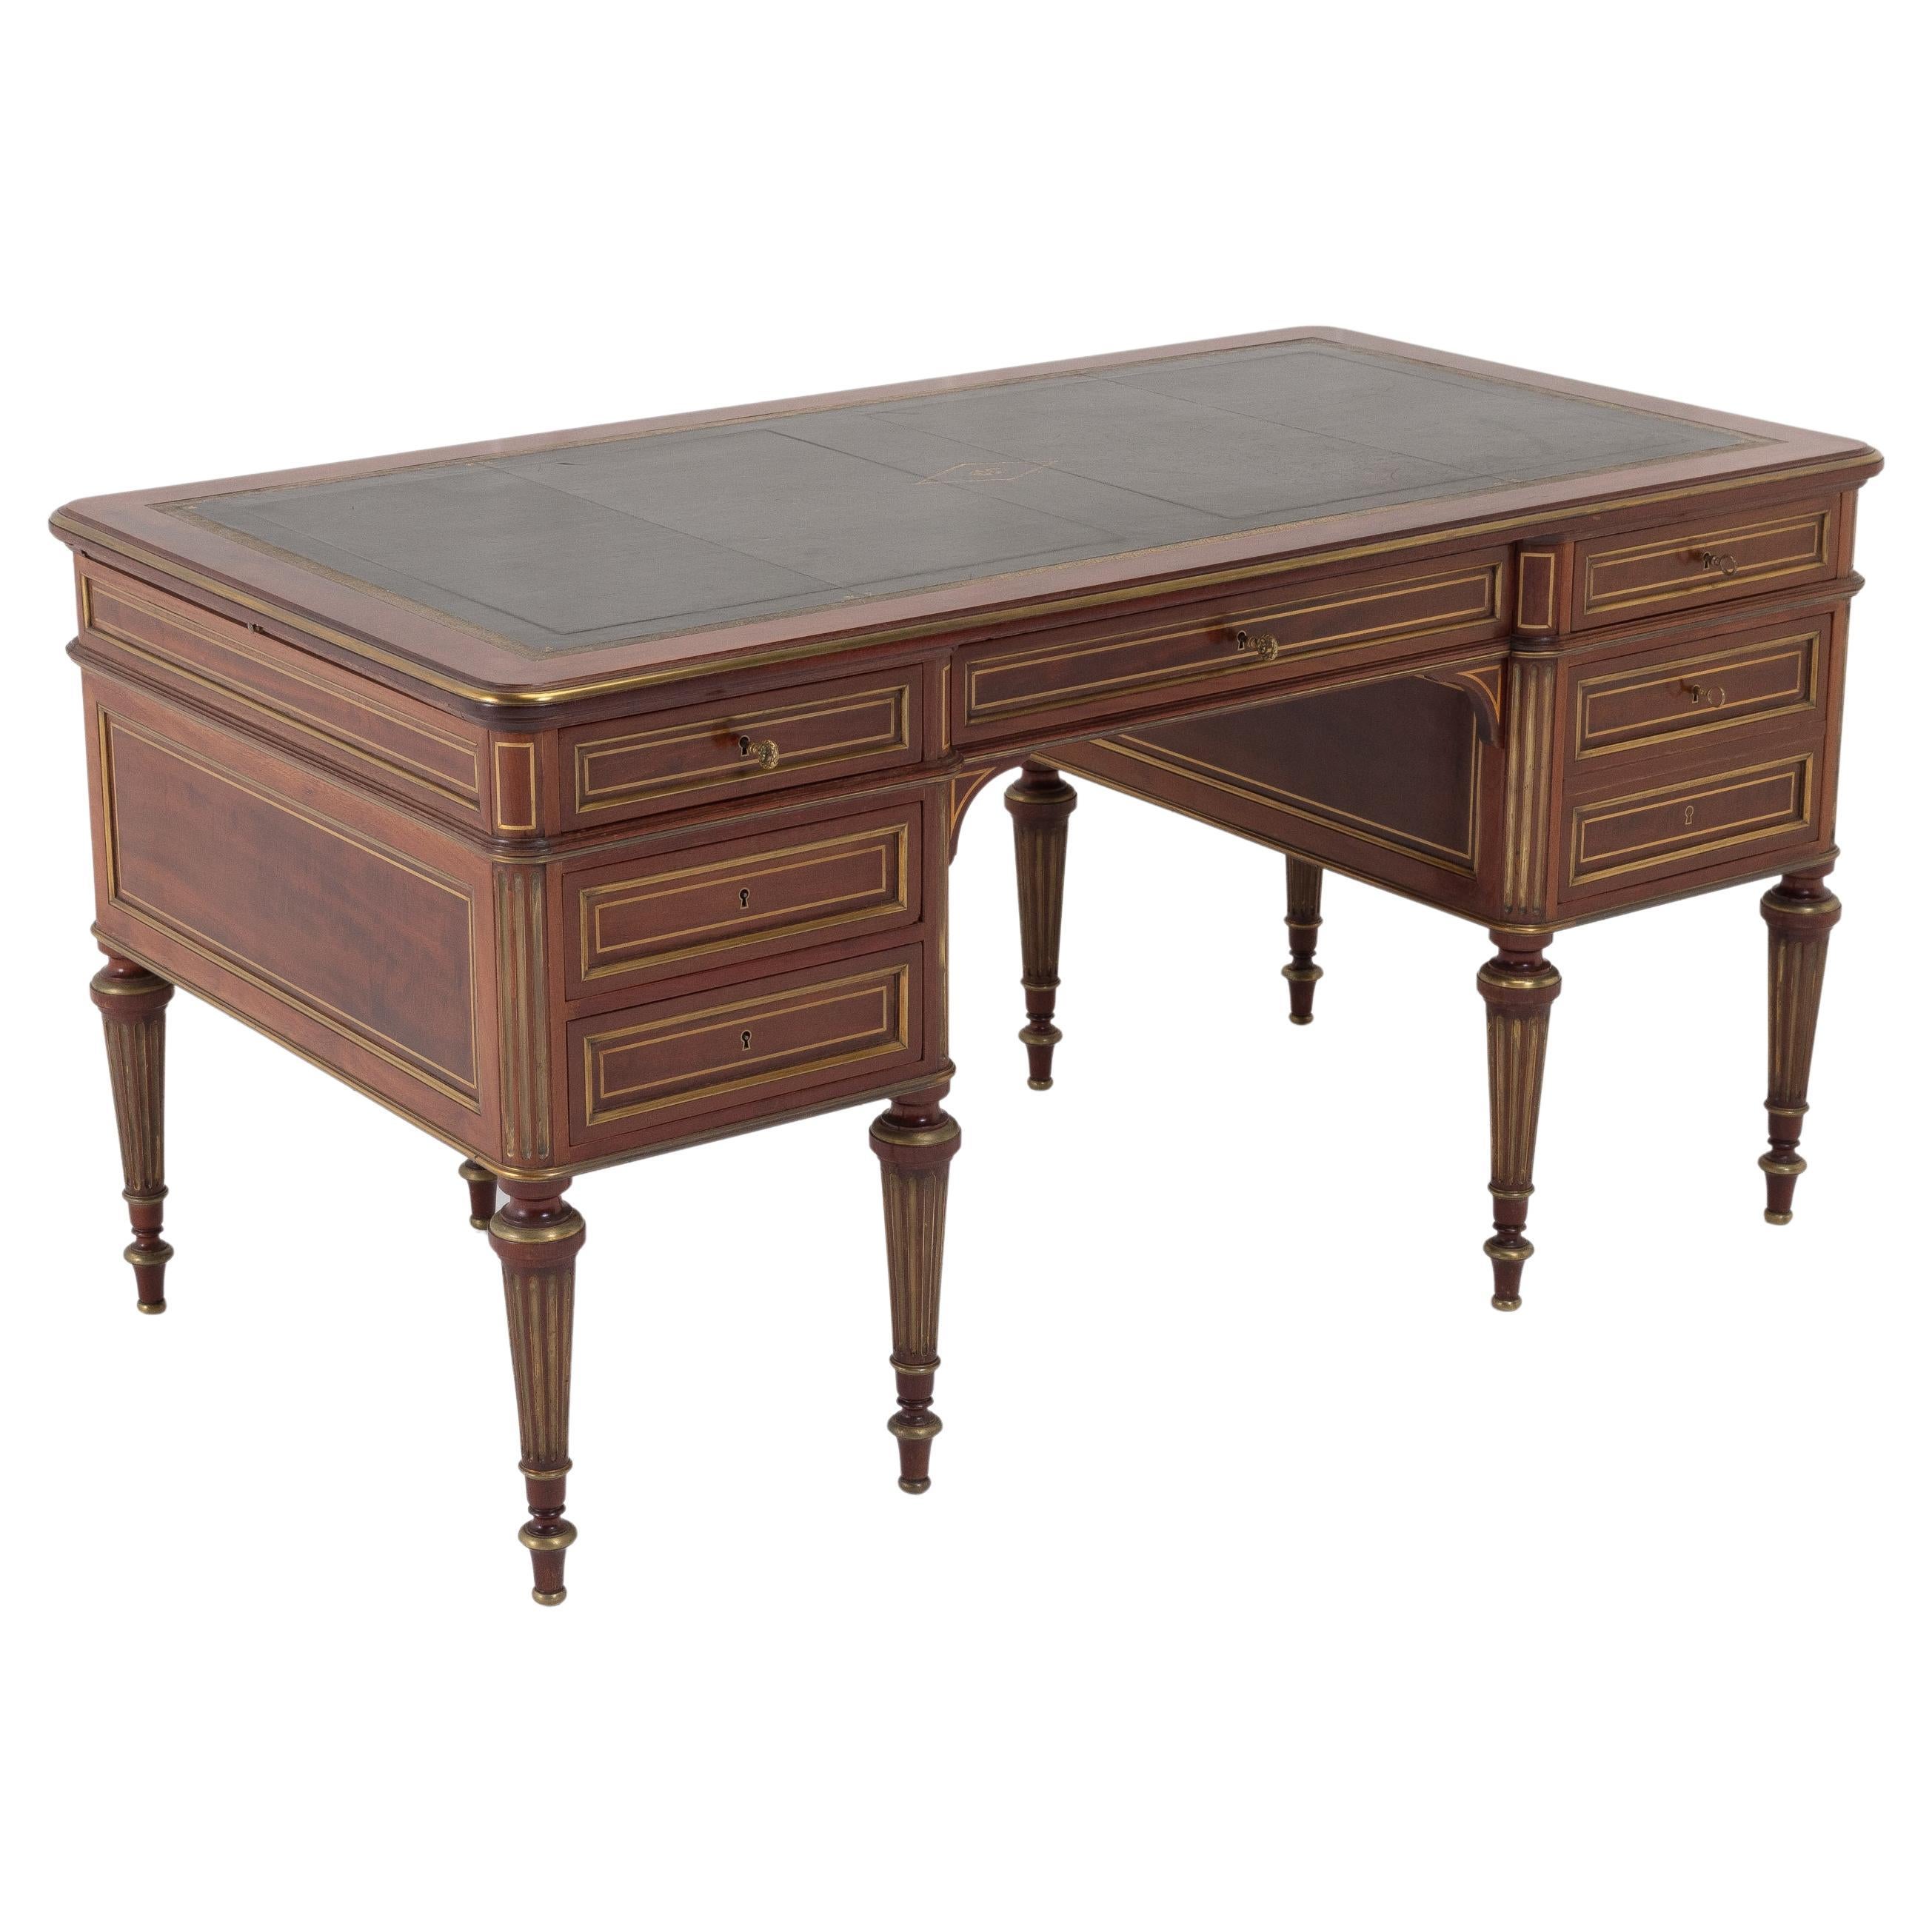 19th Century French Brass Inlaid Mahogany Desk For Sale